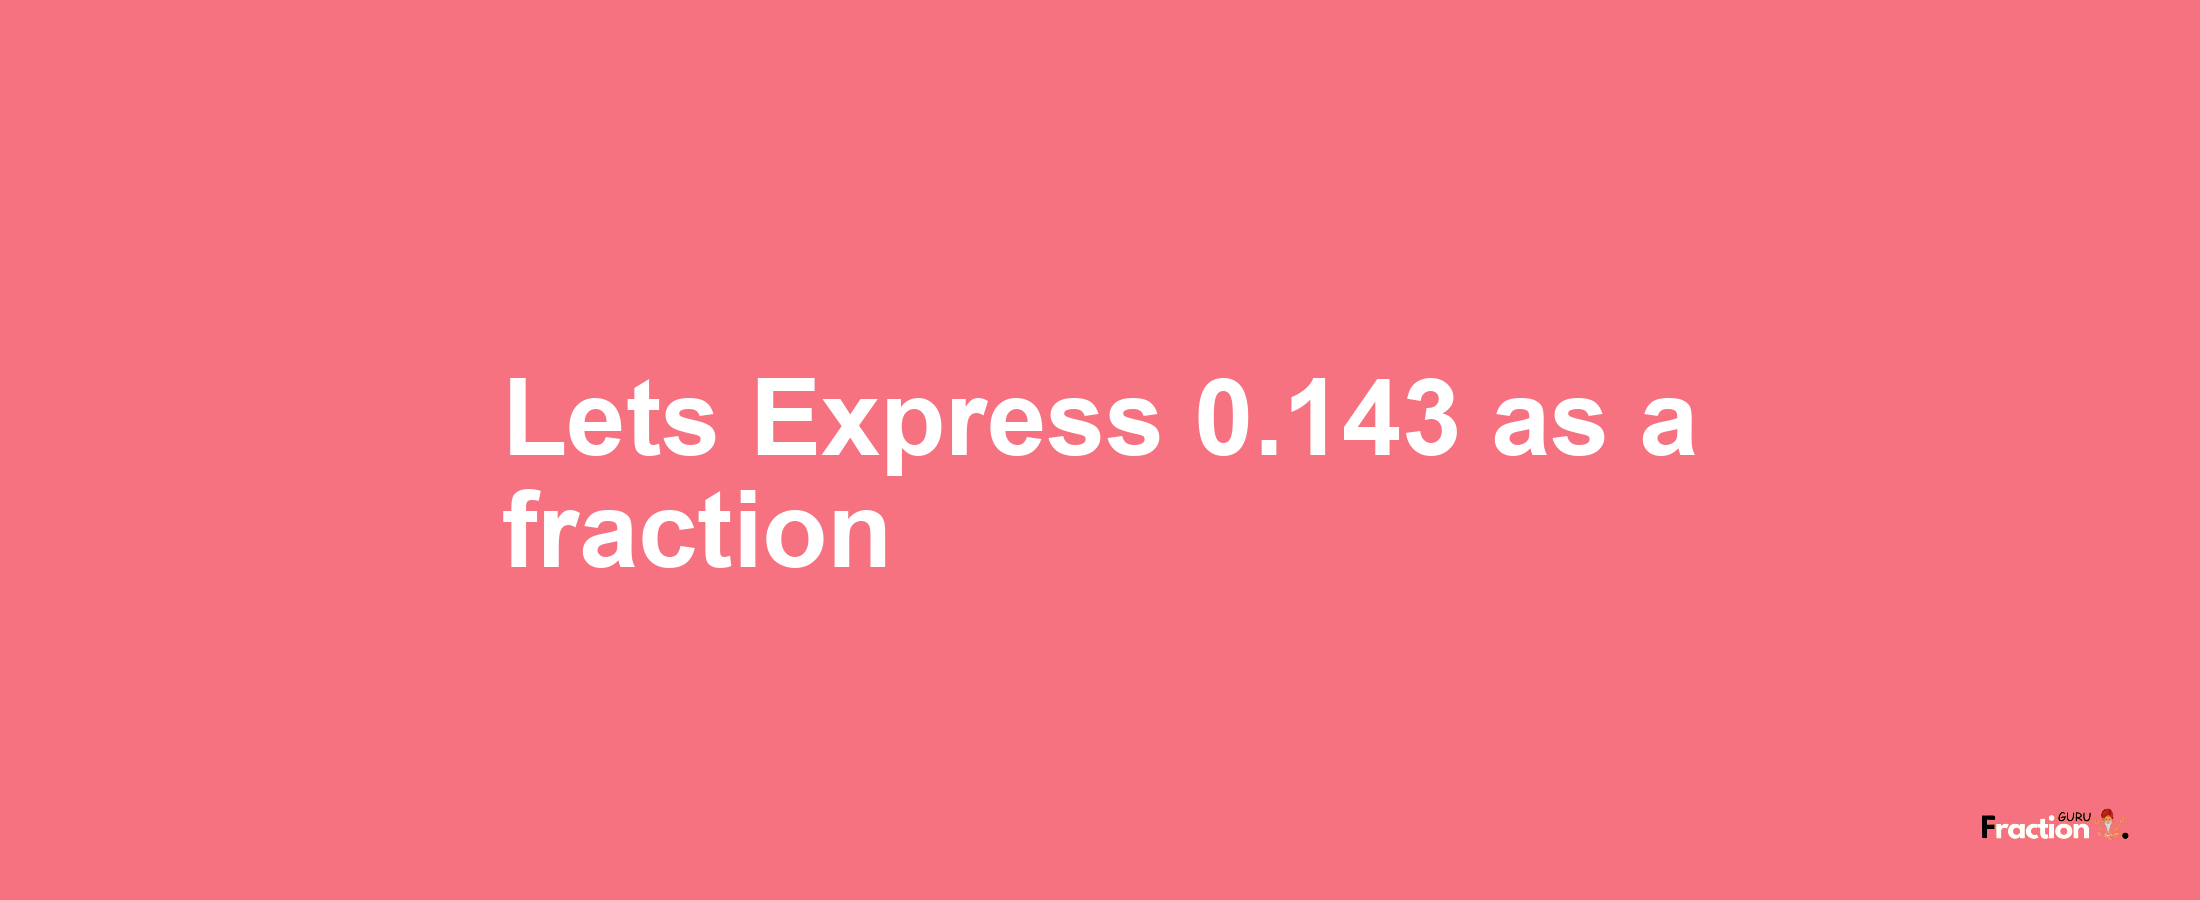 Lets Express 0.143 as afraction